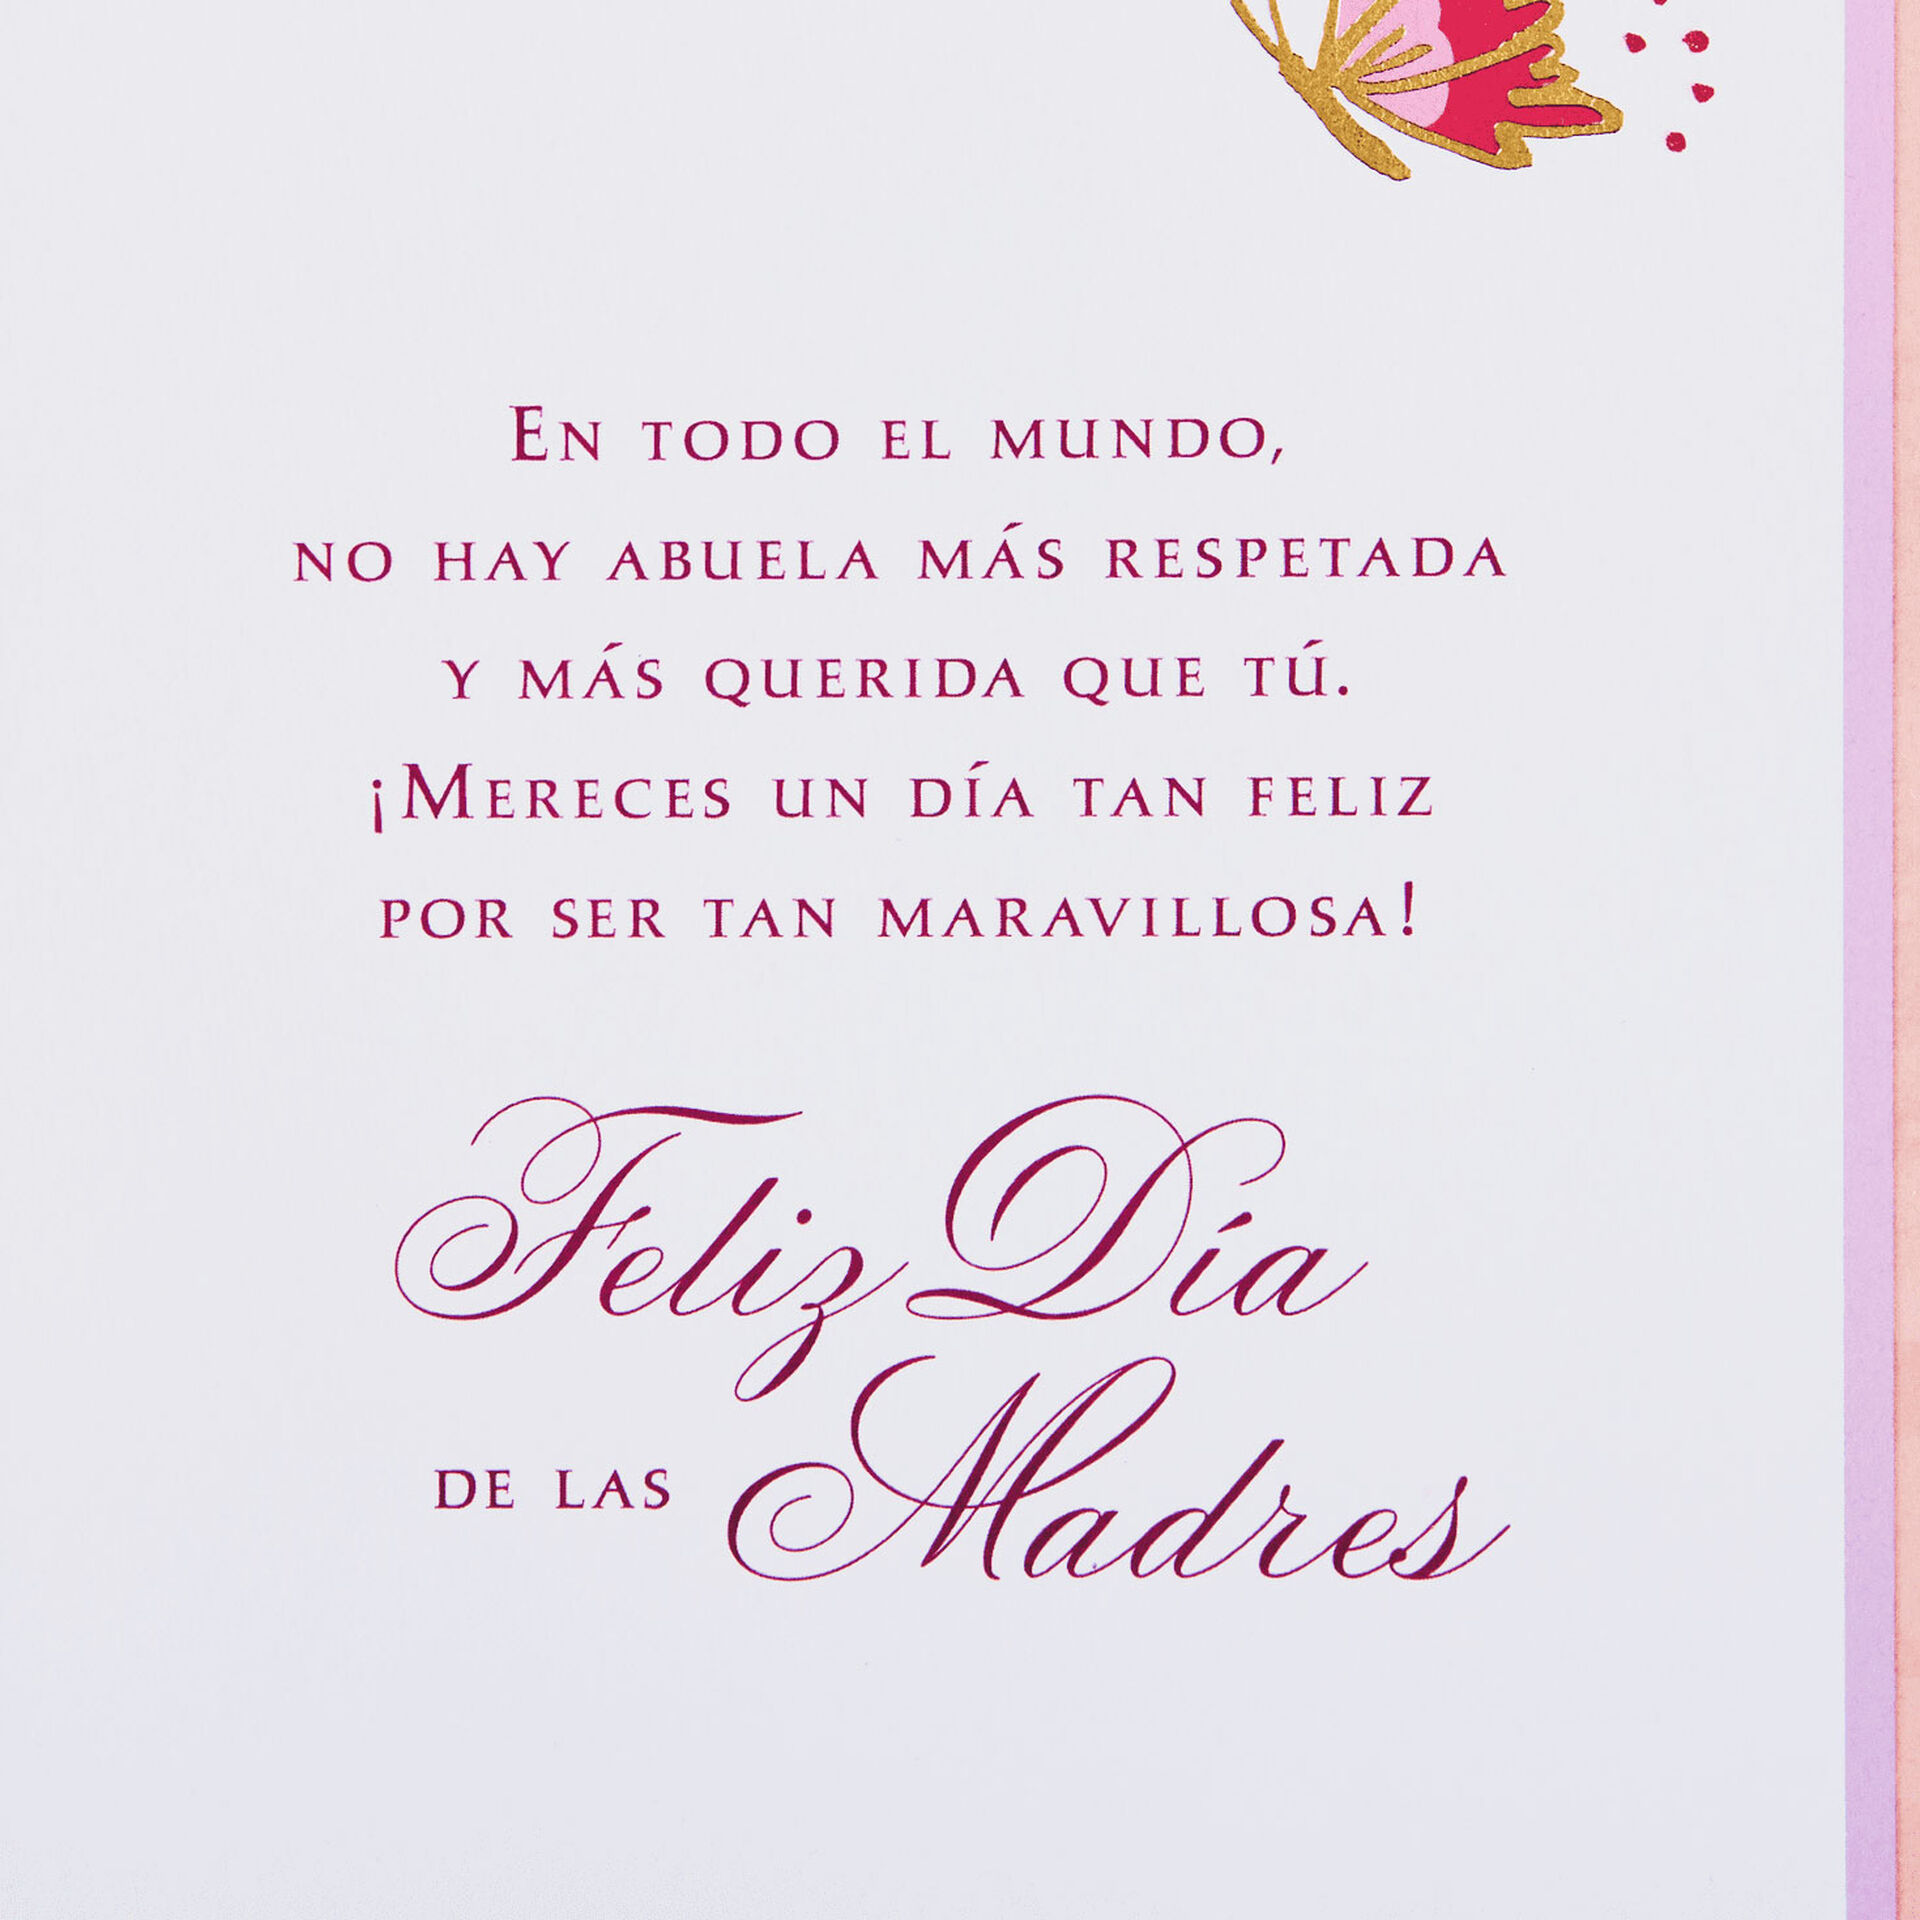 So Loving and Generous SpanishLanguage Mother's Day Card for